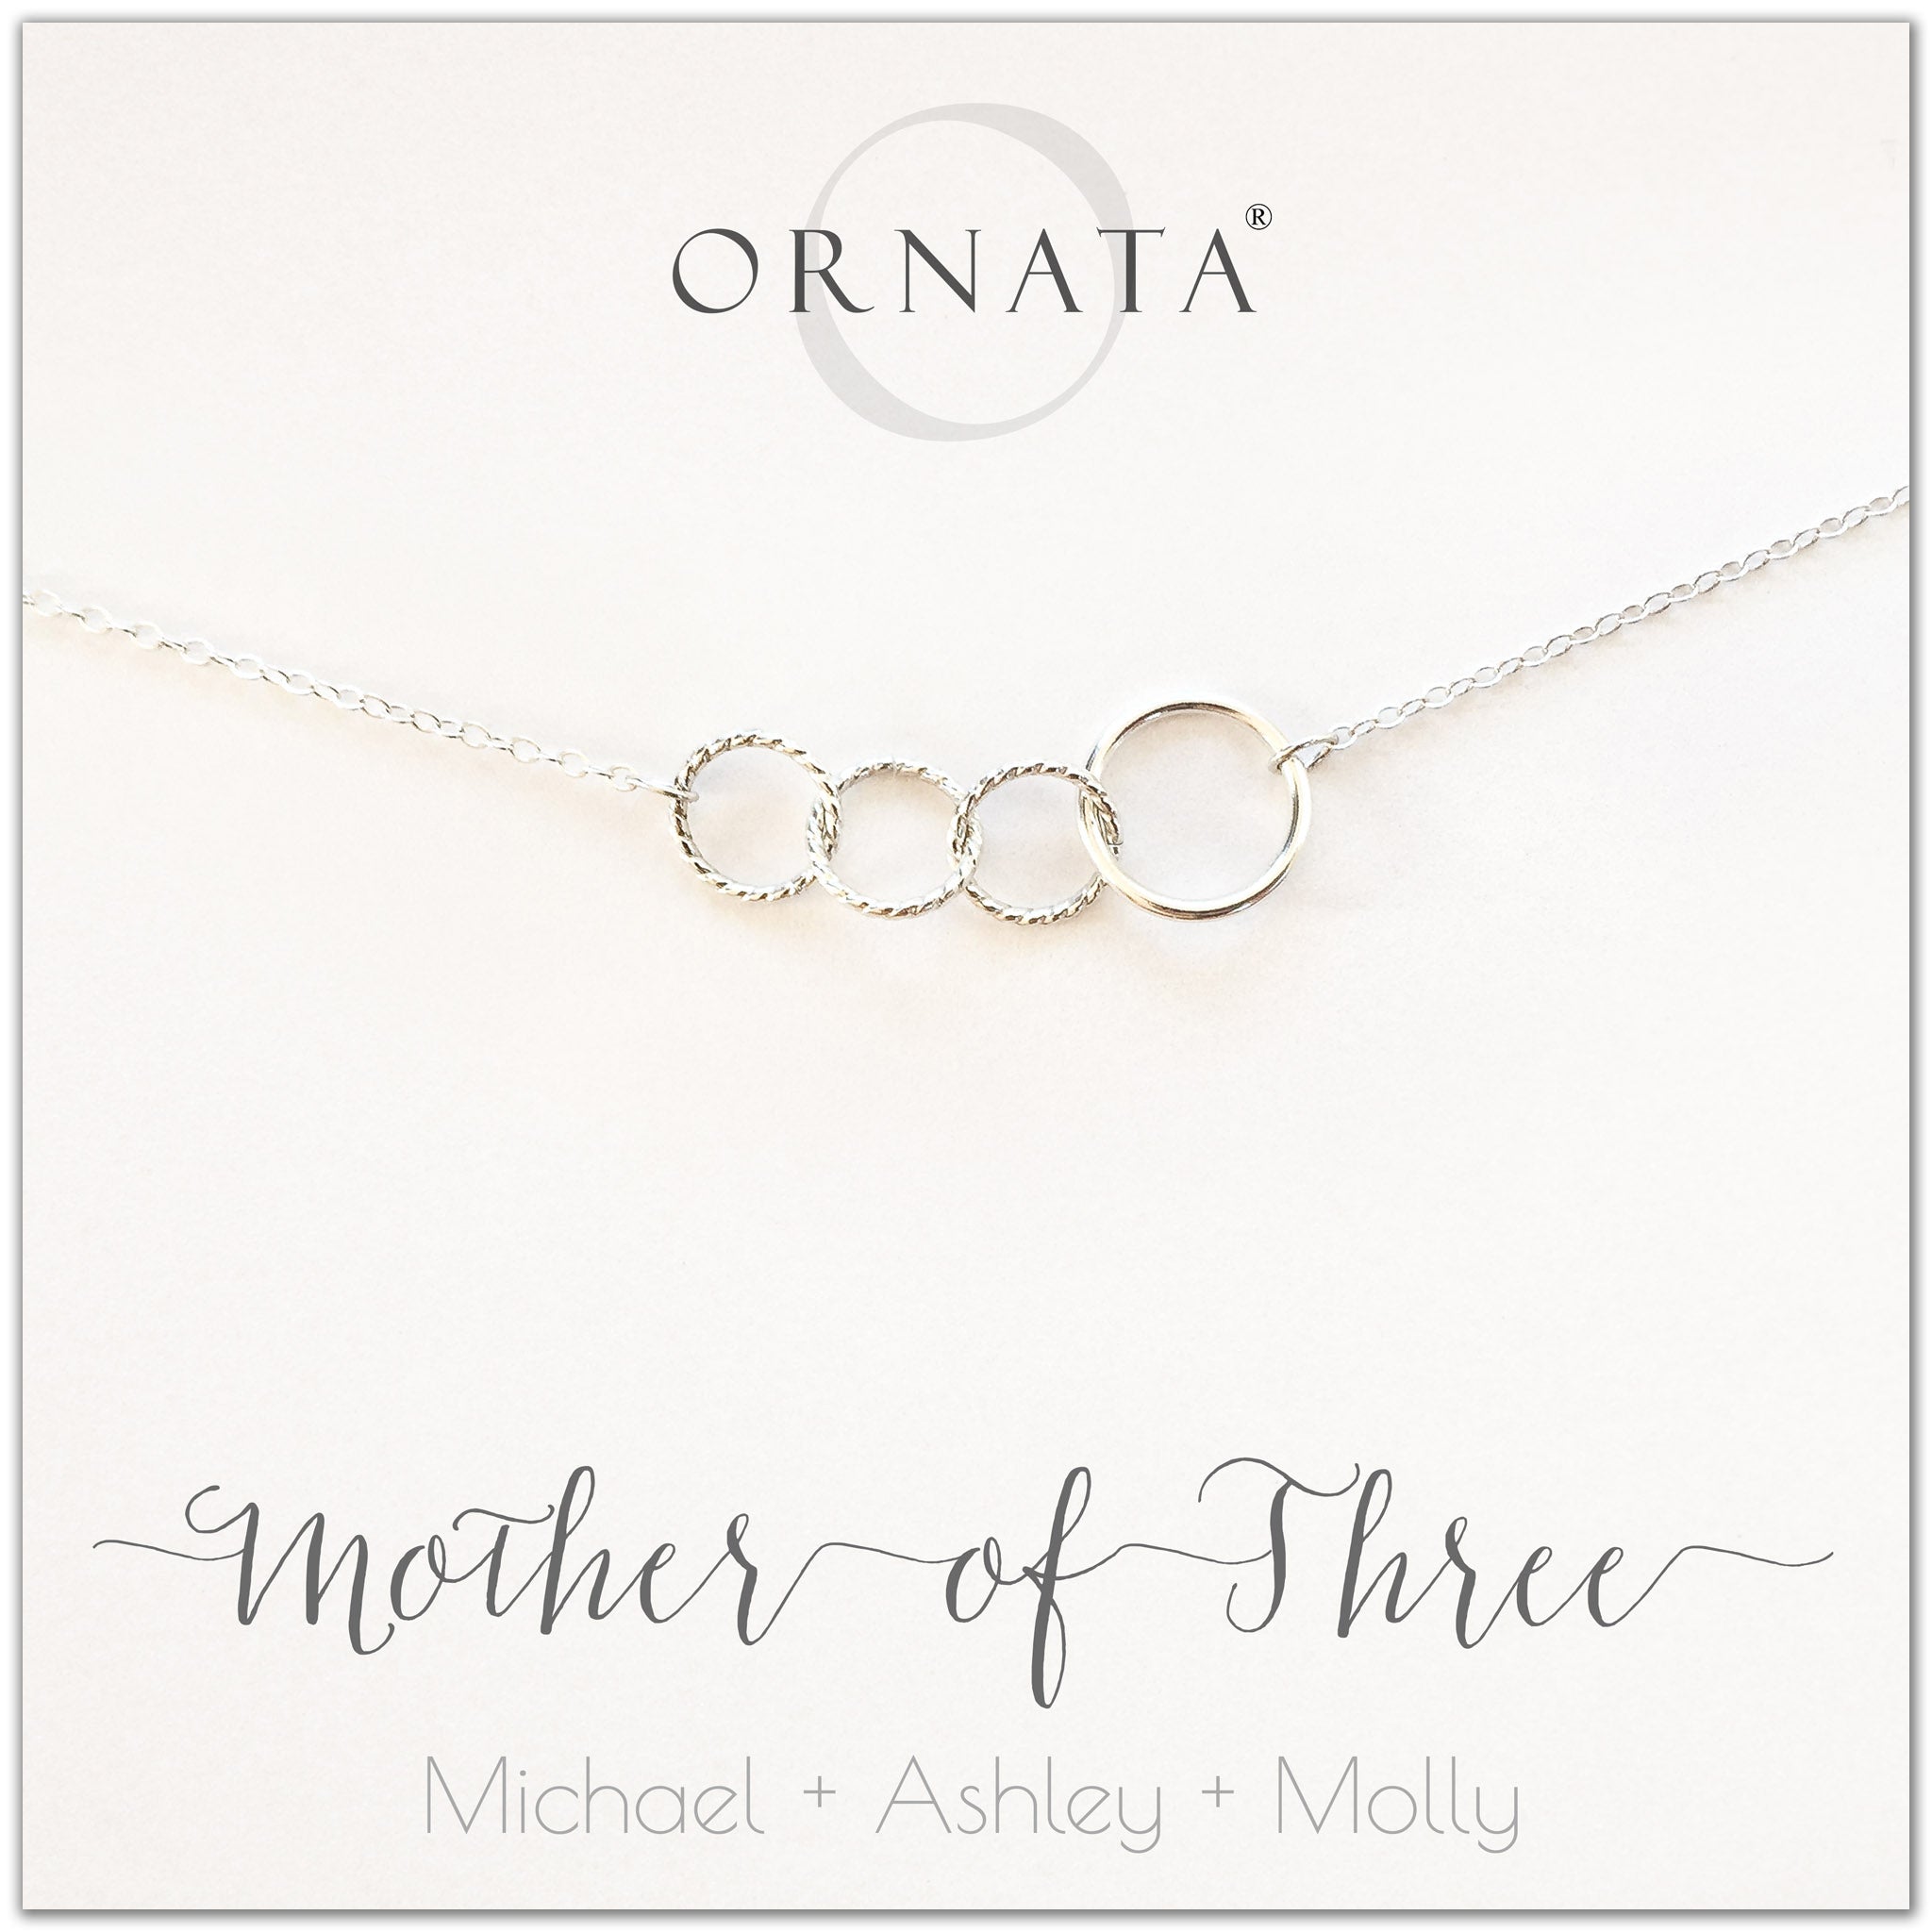 Mom or Mother of Three - personalized silver necklaces. Our sterling silver custom jewelry is a perfect gift for mothers of three children, wives, or family members. Also a good gift for Mother’s Day. Delicate sterling silver interlocking rings represent a mother and her three children. 